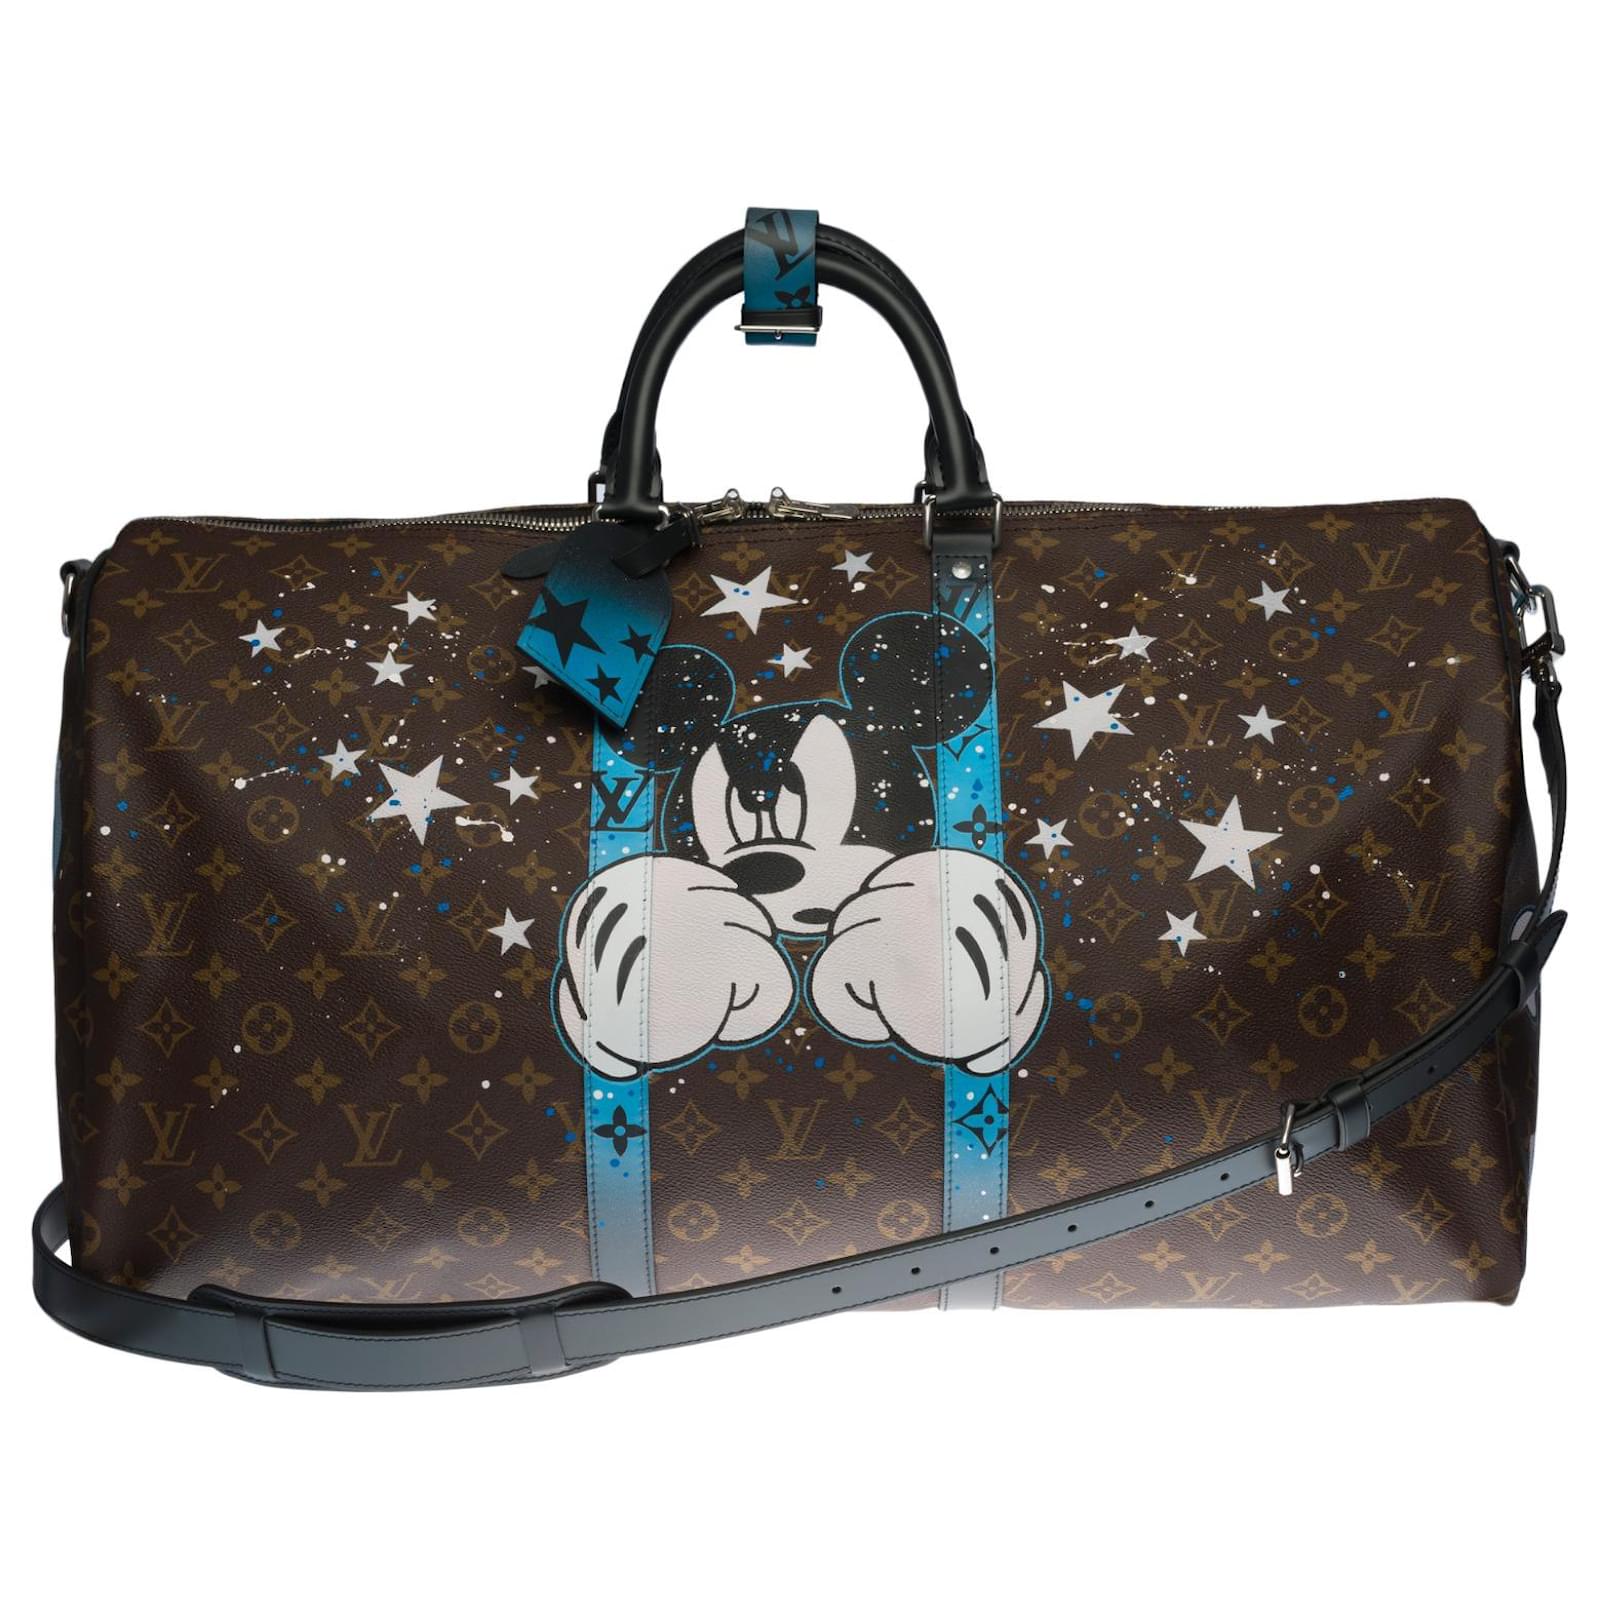 Your Guide to 8 of the Most Popular Louis Vuitton Bags  Handbags and  Accessories  Sothebys